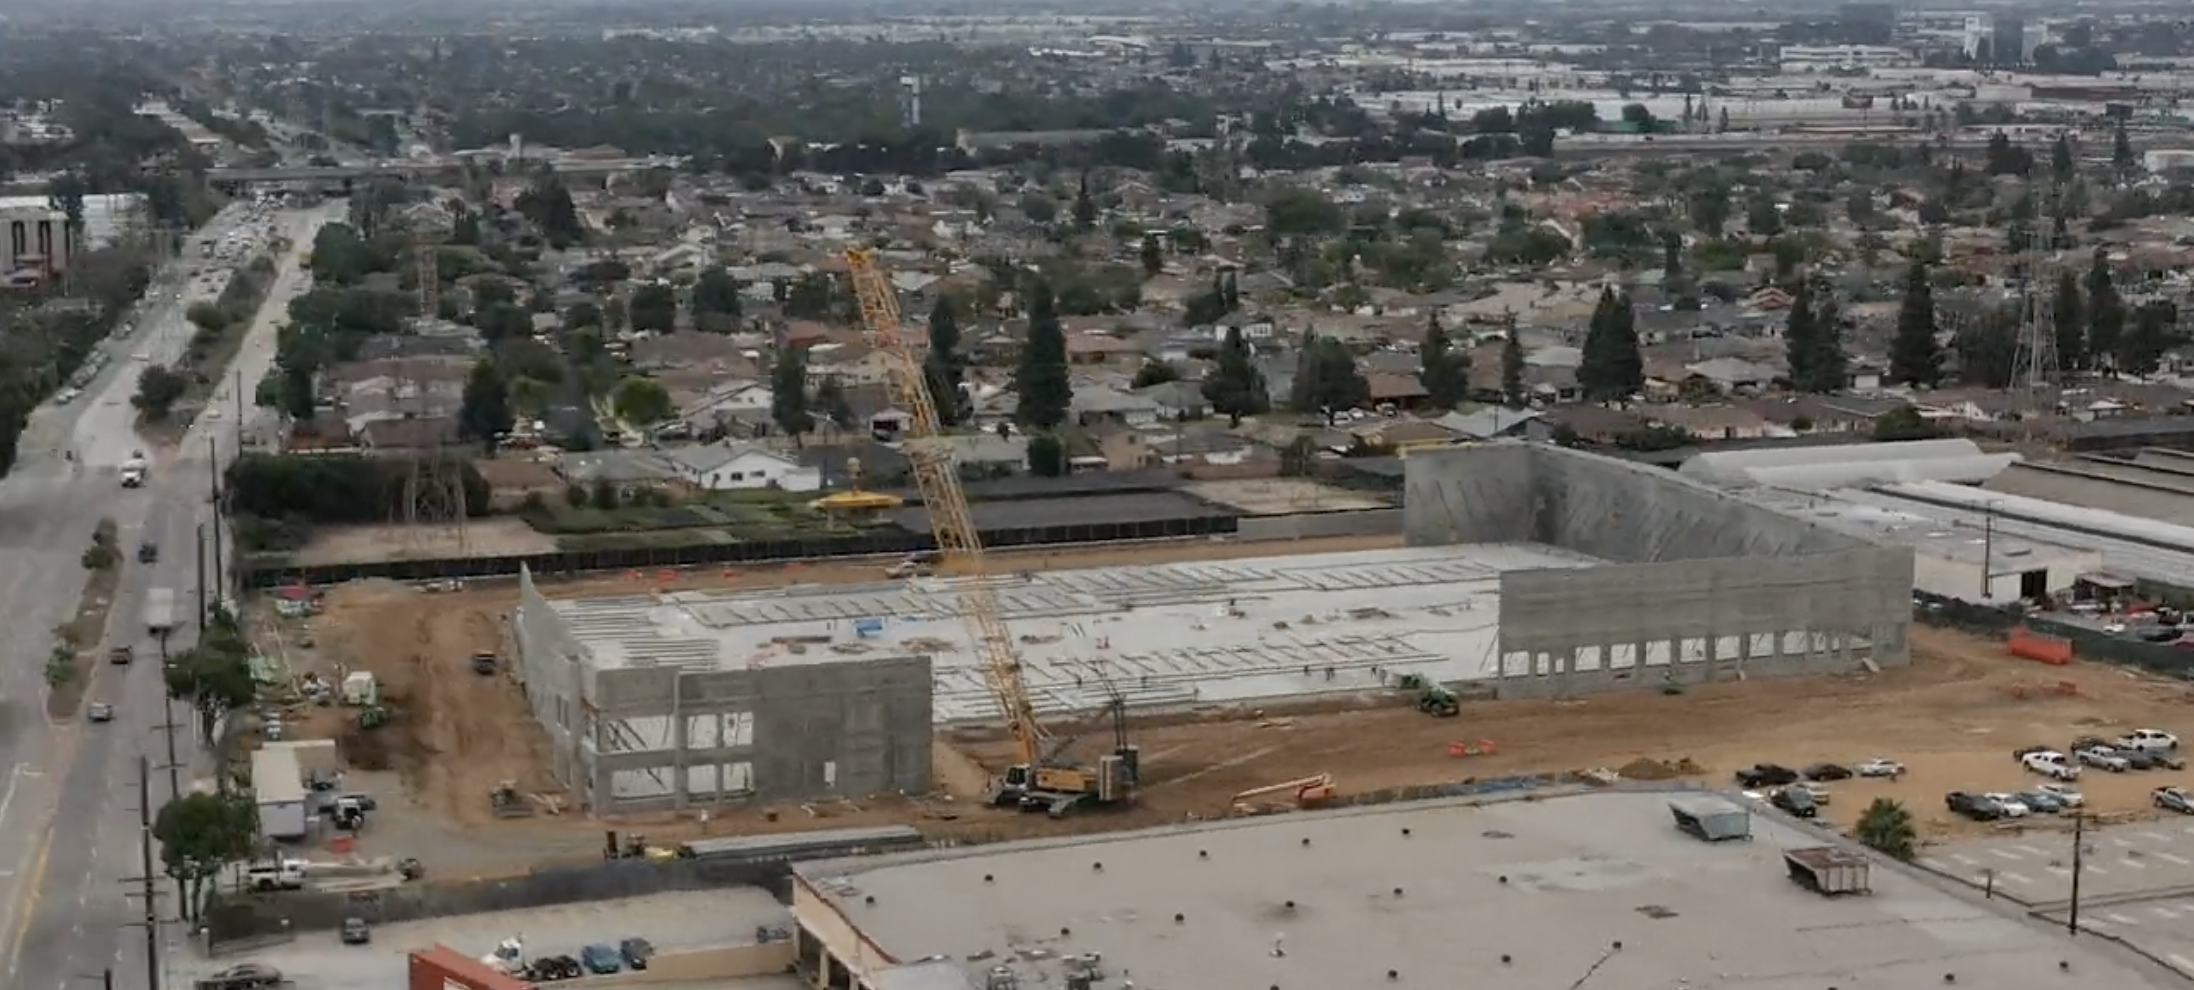 Walls Up at CenterPoint’s Redevelopment Near Port of Long Beach Image